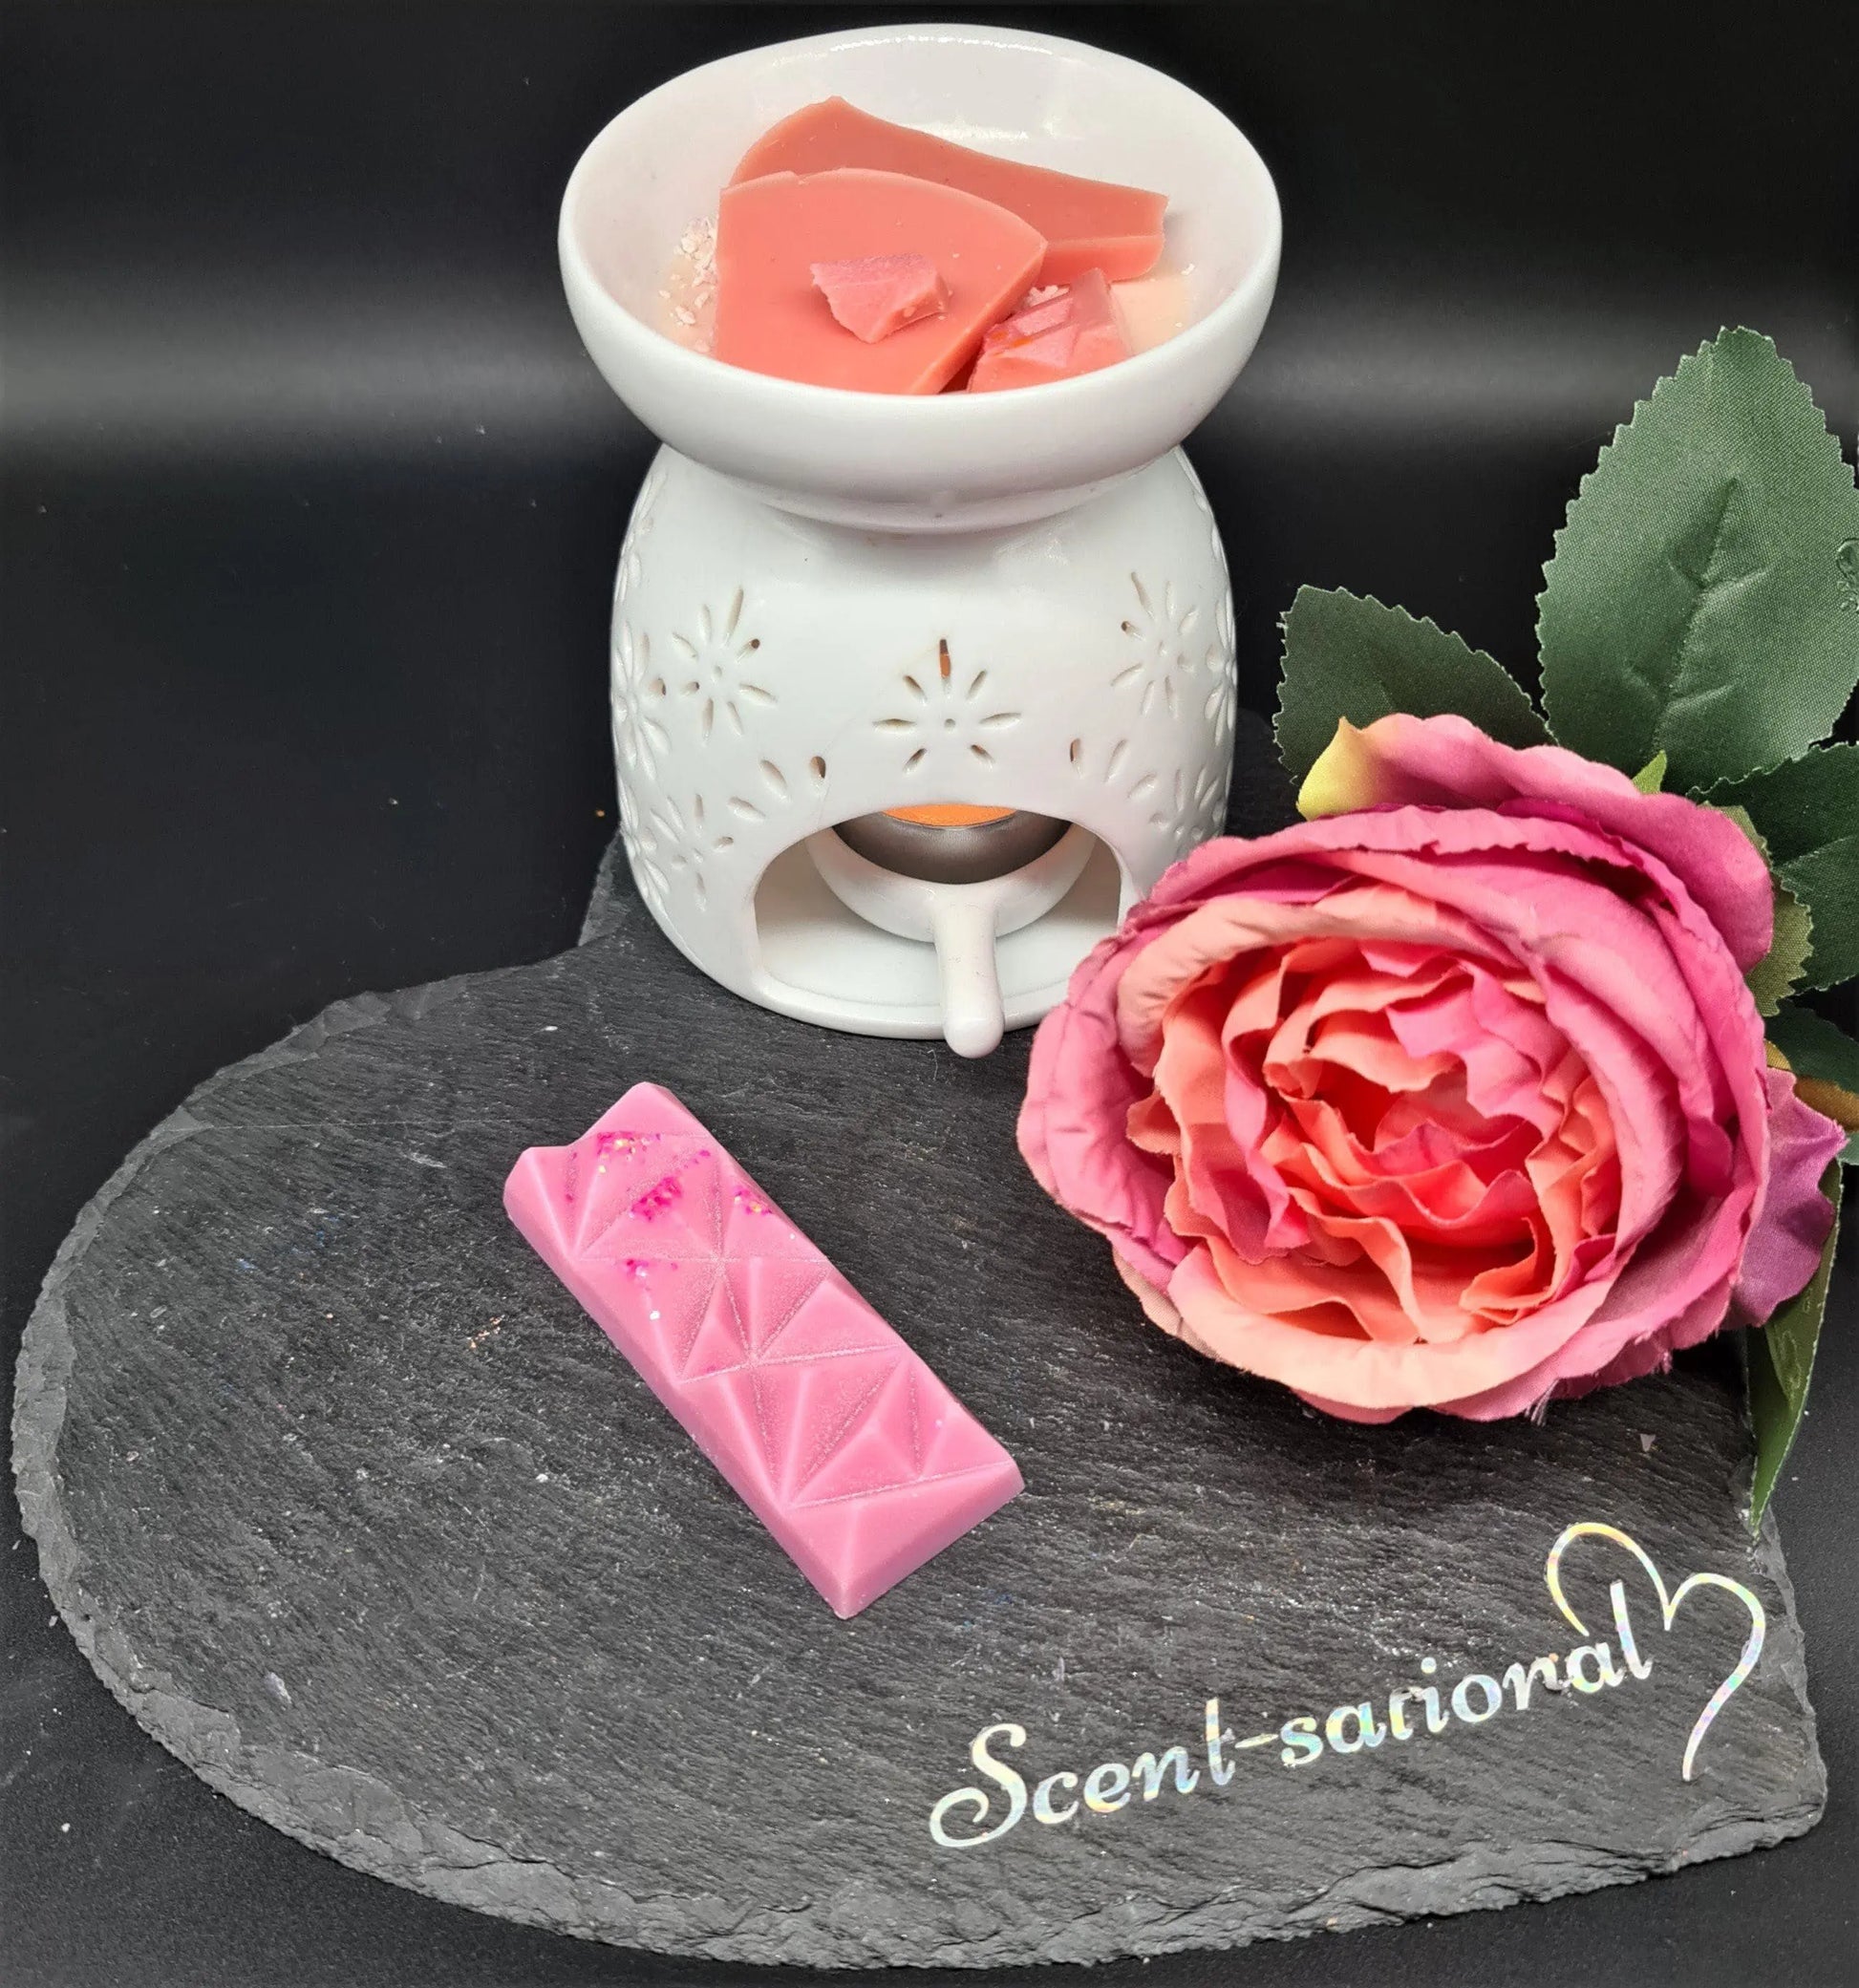 Peony and Blush Suede Wax Melts Scent Sational Wax melts